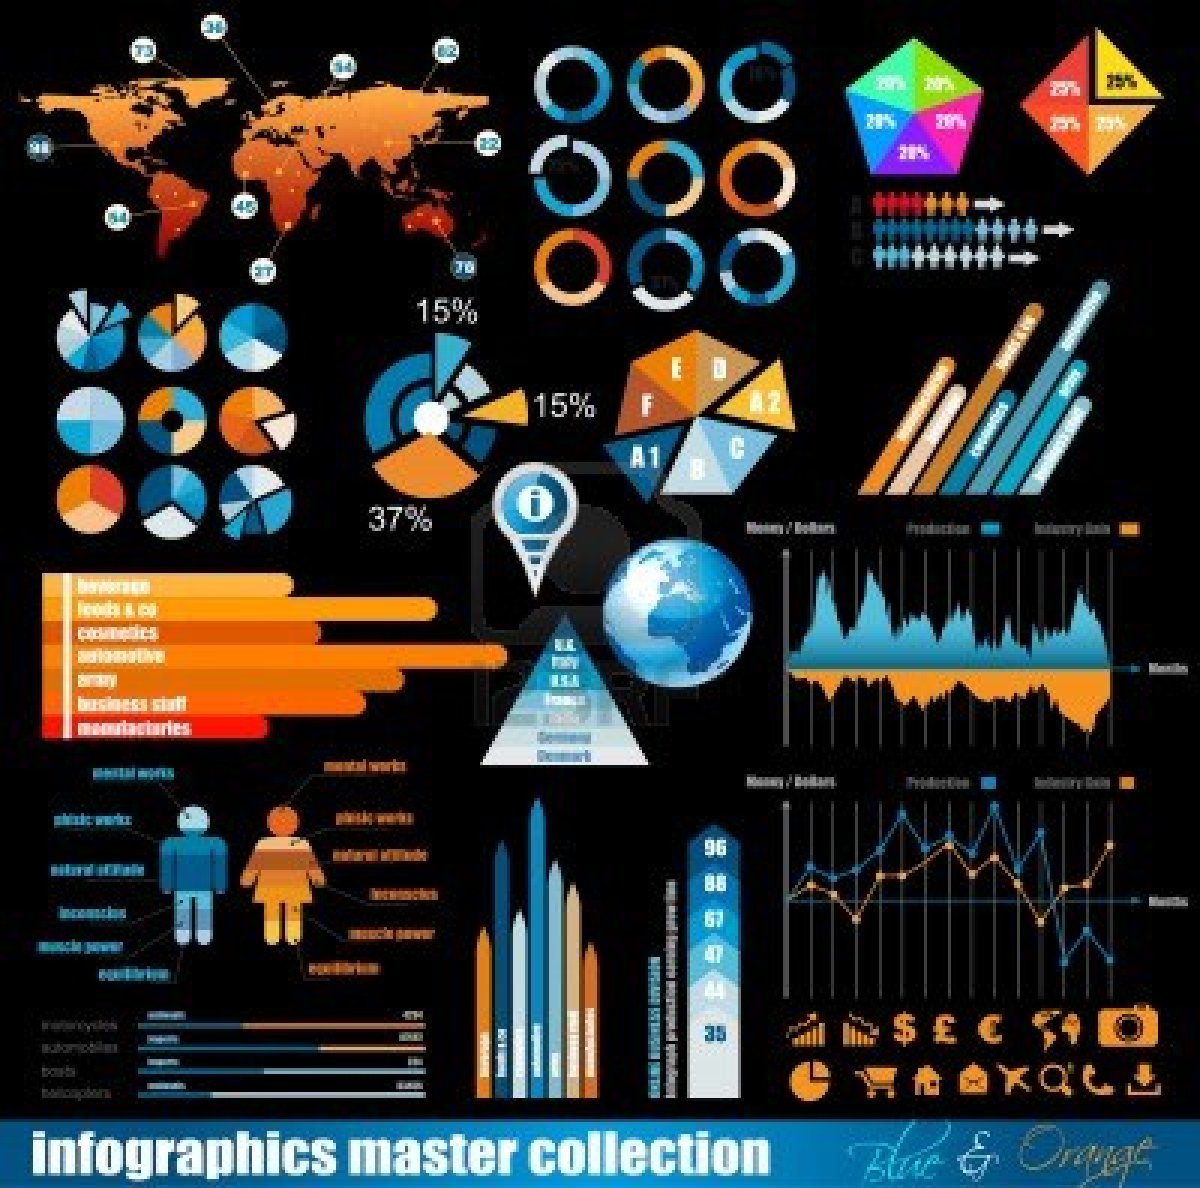 11138373-premium-infographics-master-collection-graphs-histograms-arrows-chart-3d-globe-icons-and-a-lot-of-re.jpg